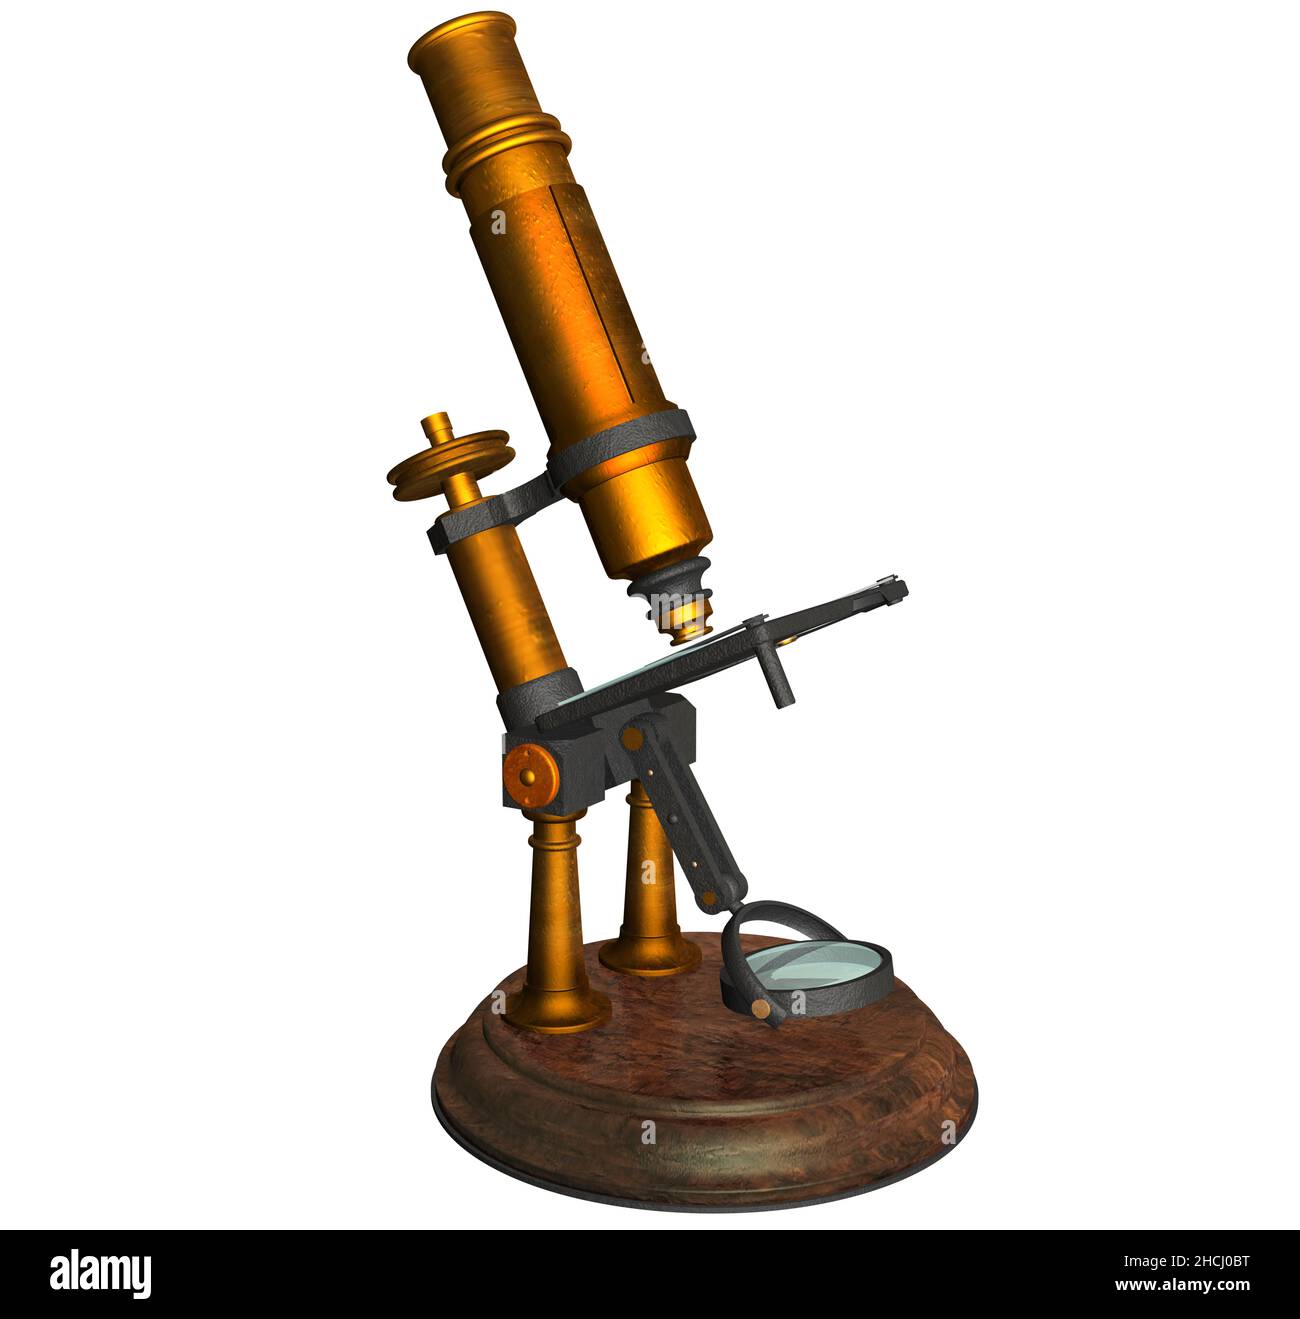 3D Rendering Illustration of an Antique Early XIX Century Microscope. Stock Photo